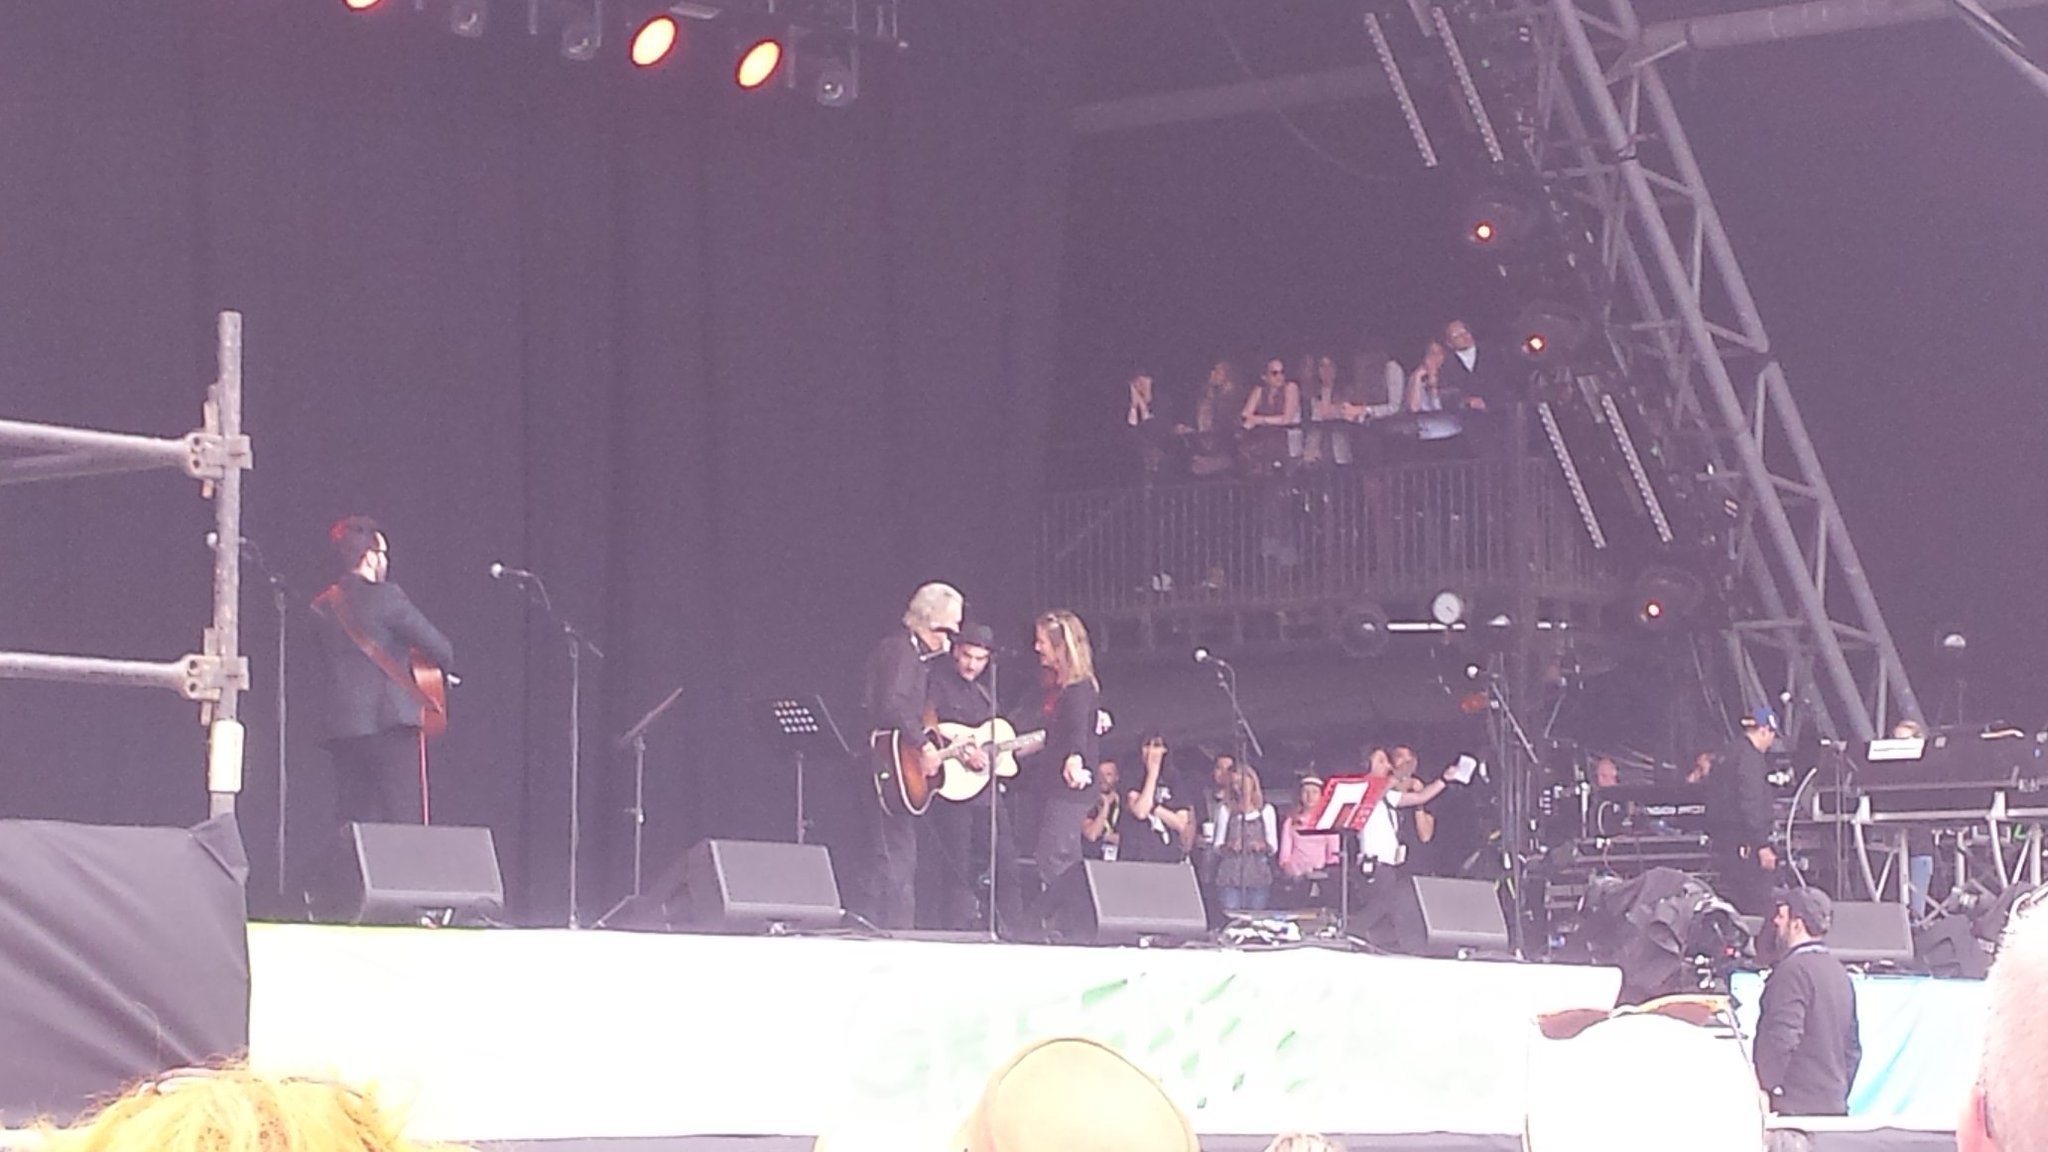 They\re singing happy birthday as Kris Kristofferson tunes up. 